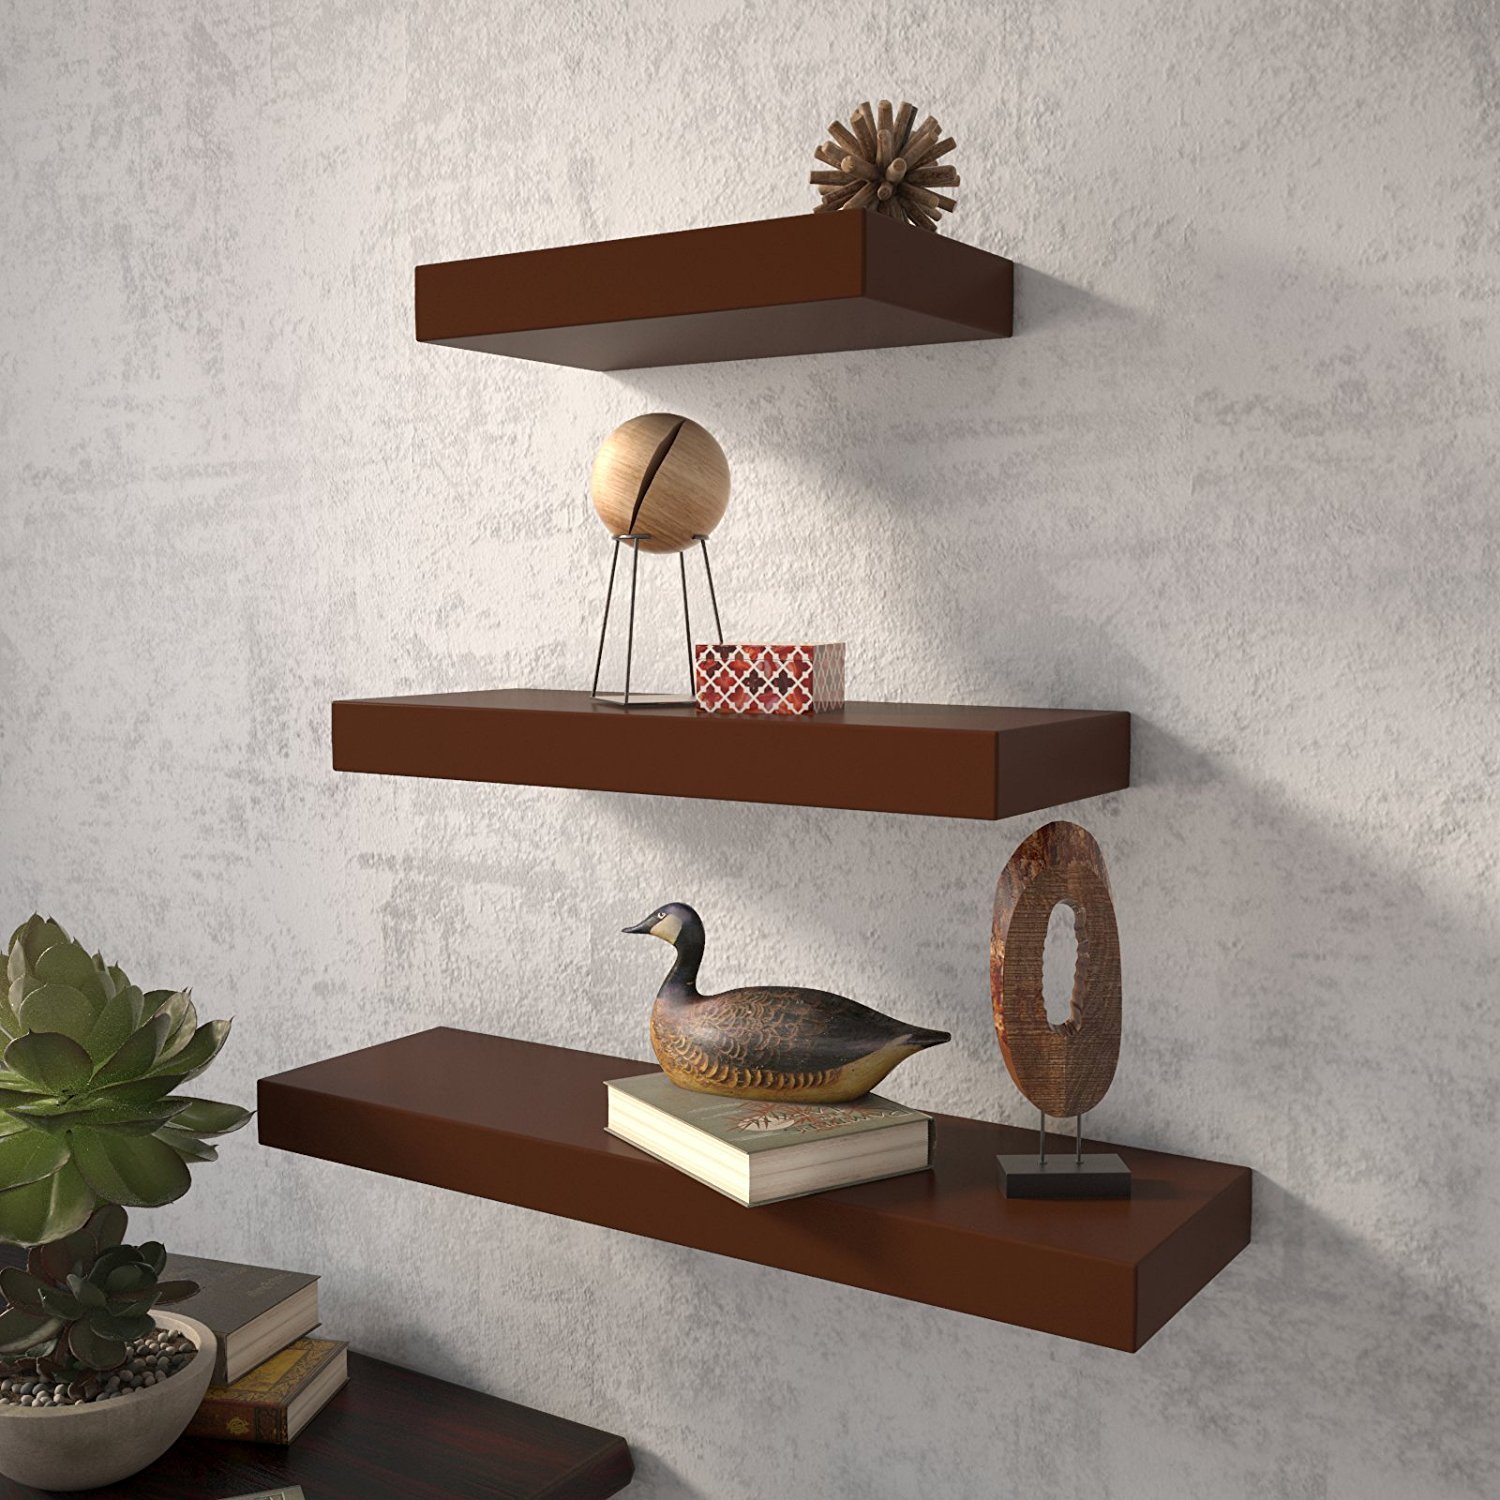 Set Of 3 (24x7IN 18x7IN 12x7IN) Floating Wall Shelves for Storage & Display – Brown